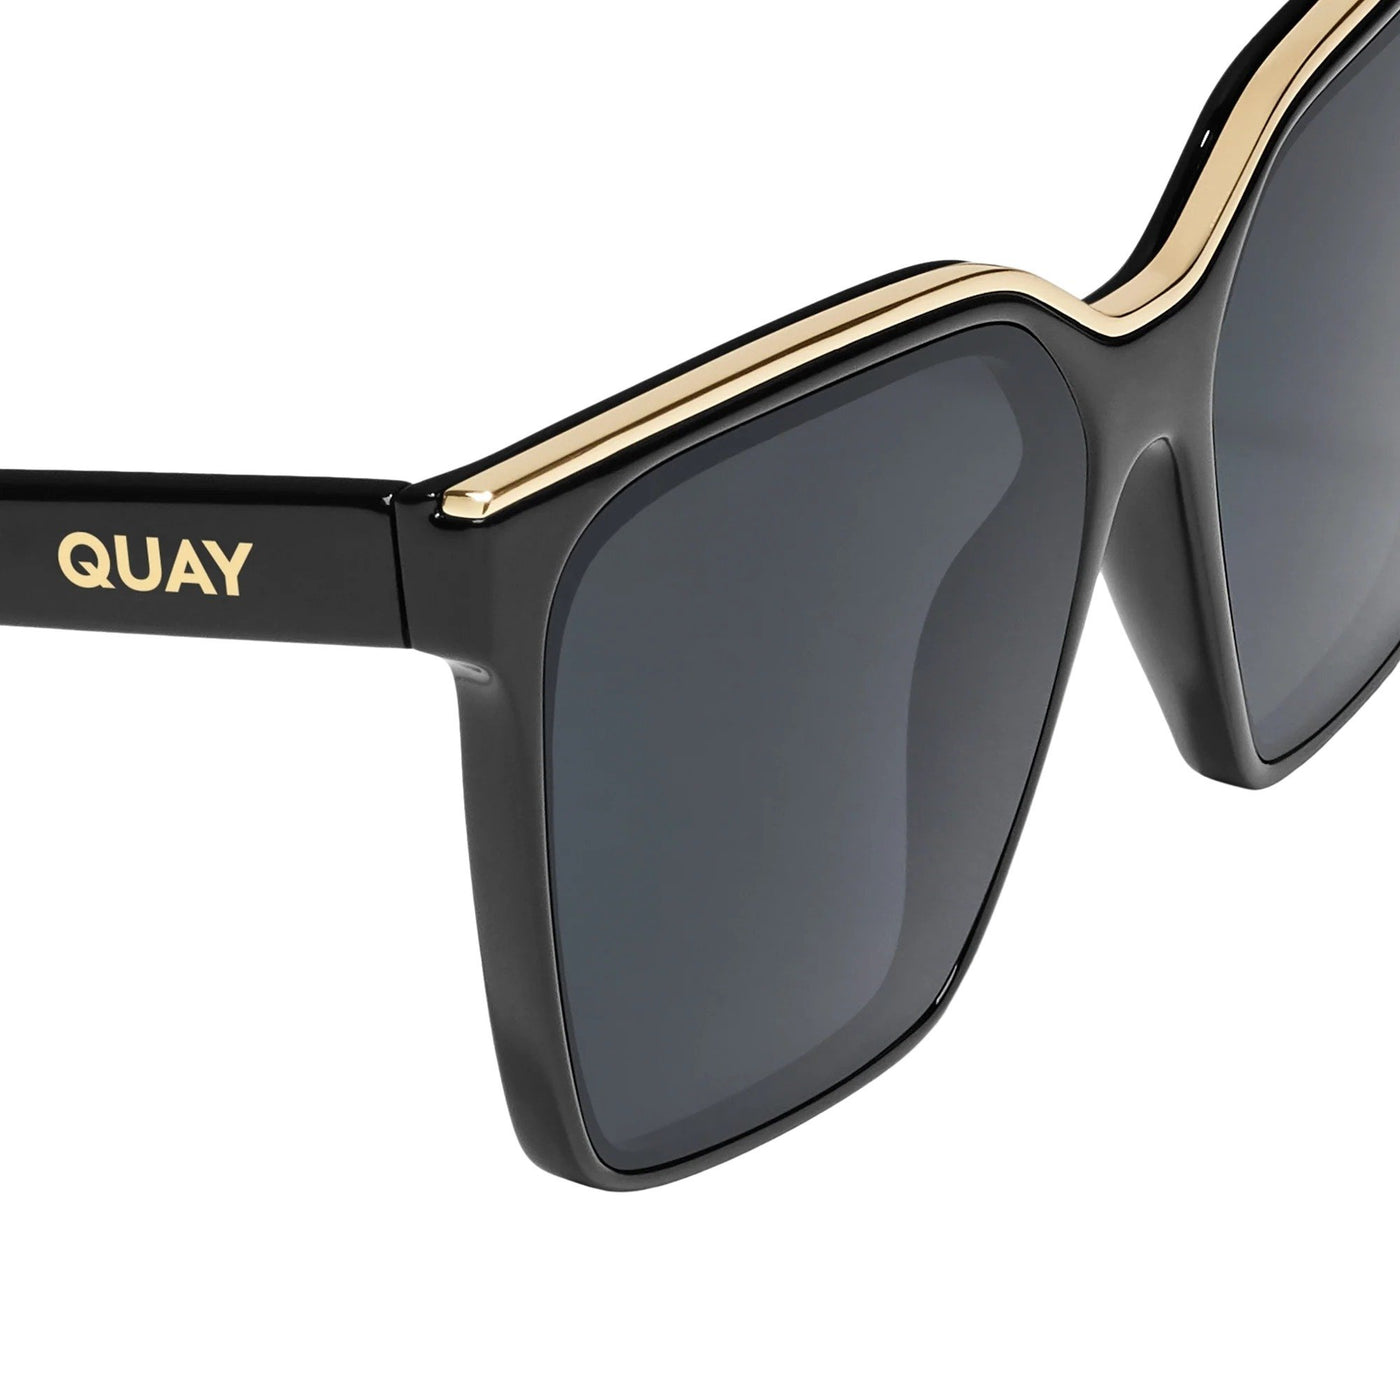 Quay Women's Level Up Square Sunglasses (Black Gold Frame/Smoke Lens) - zoomed in right profile